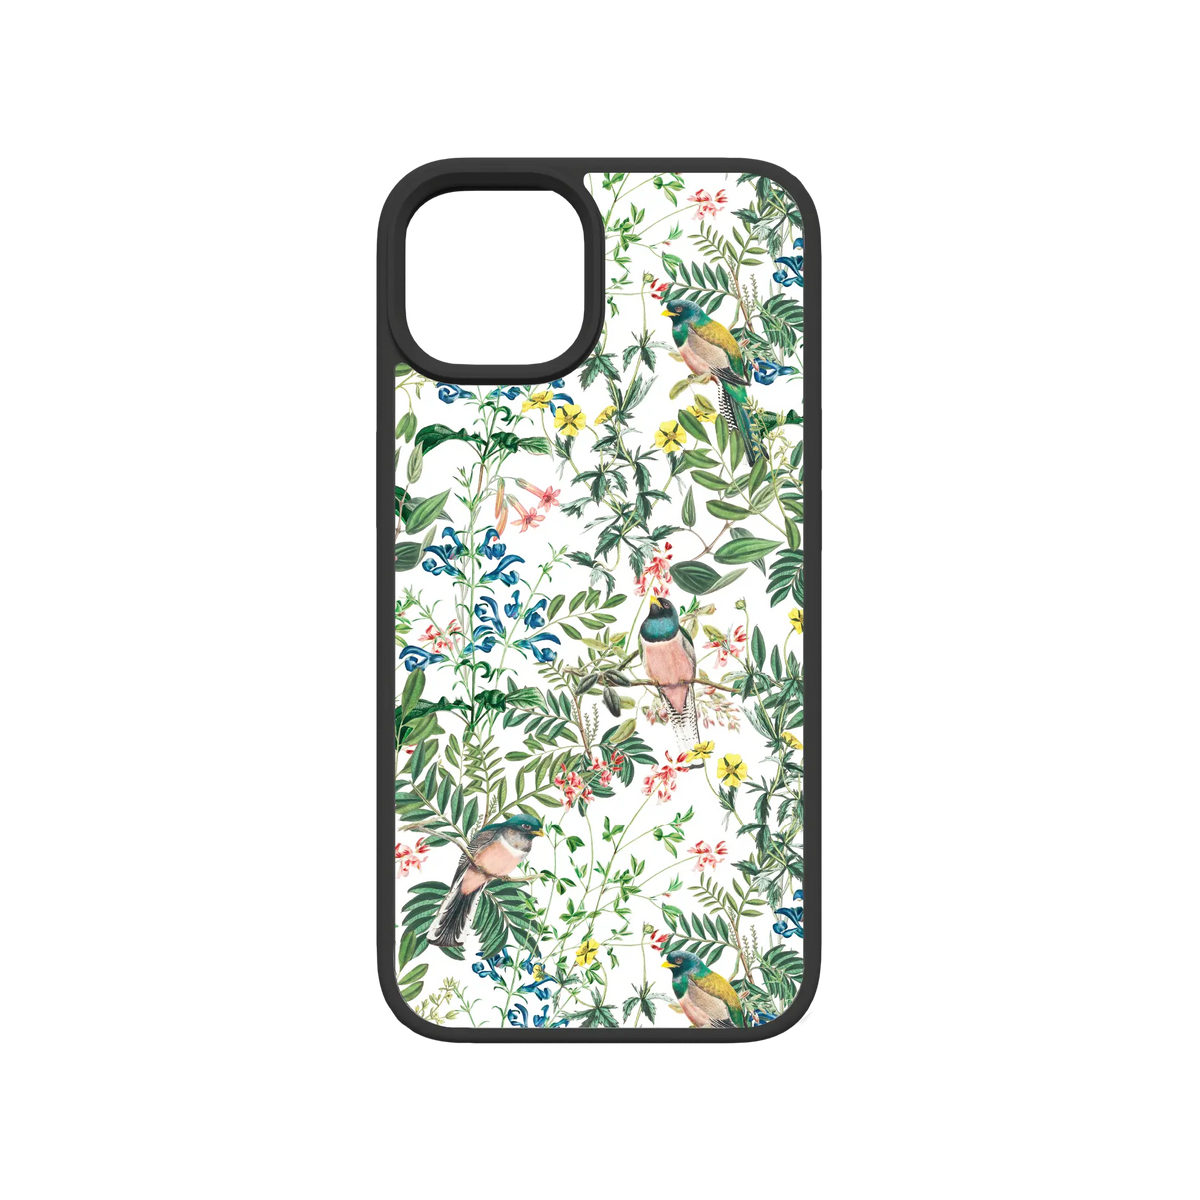 Apple-iPhone-13-Crystal-Clear Oasis Blossom | Protective MagSafe Floral Bird Case | Birds and Bees Series for Apple iPhone 13 Series cellhelmet cellhelmet